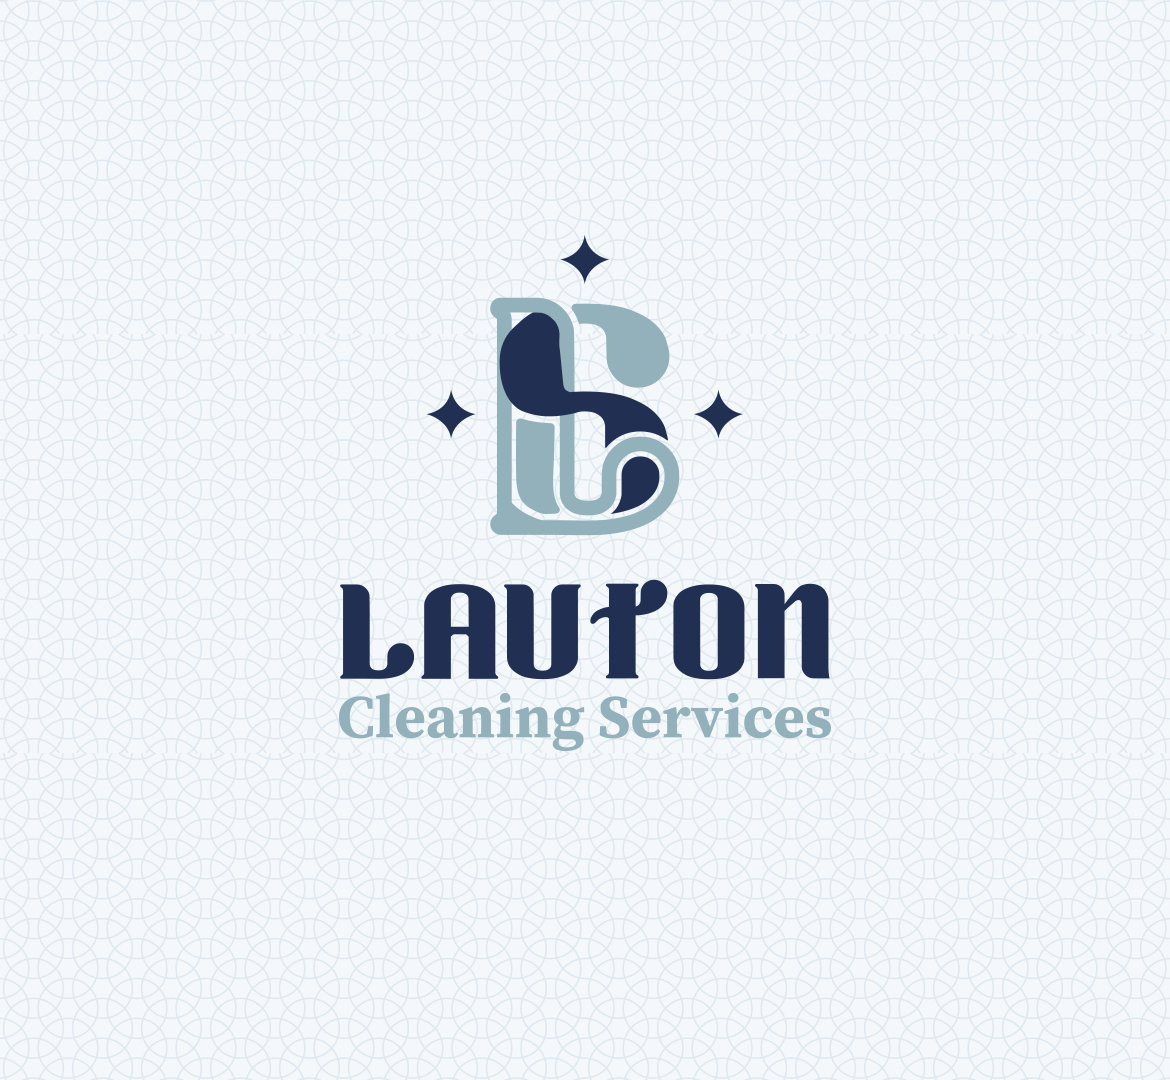 Logo Profissional Lauton Cleaning Services